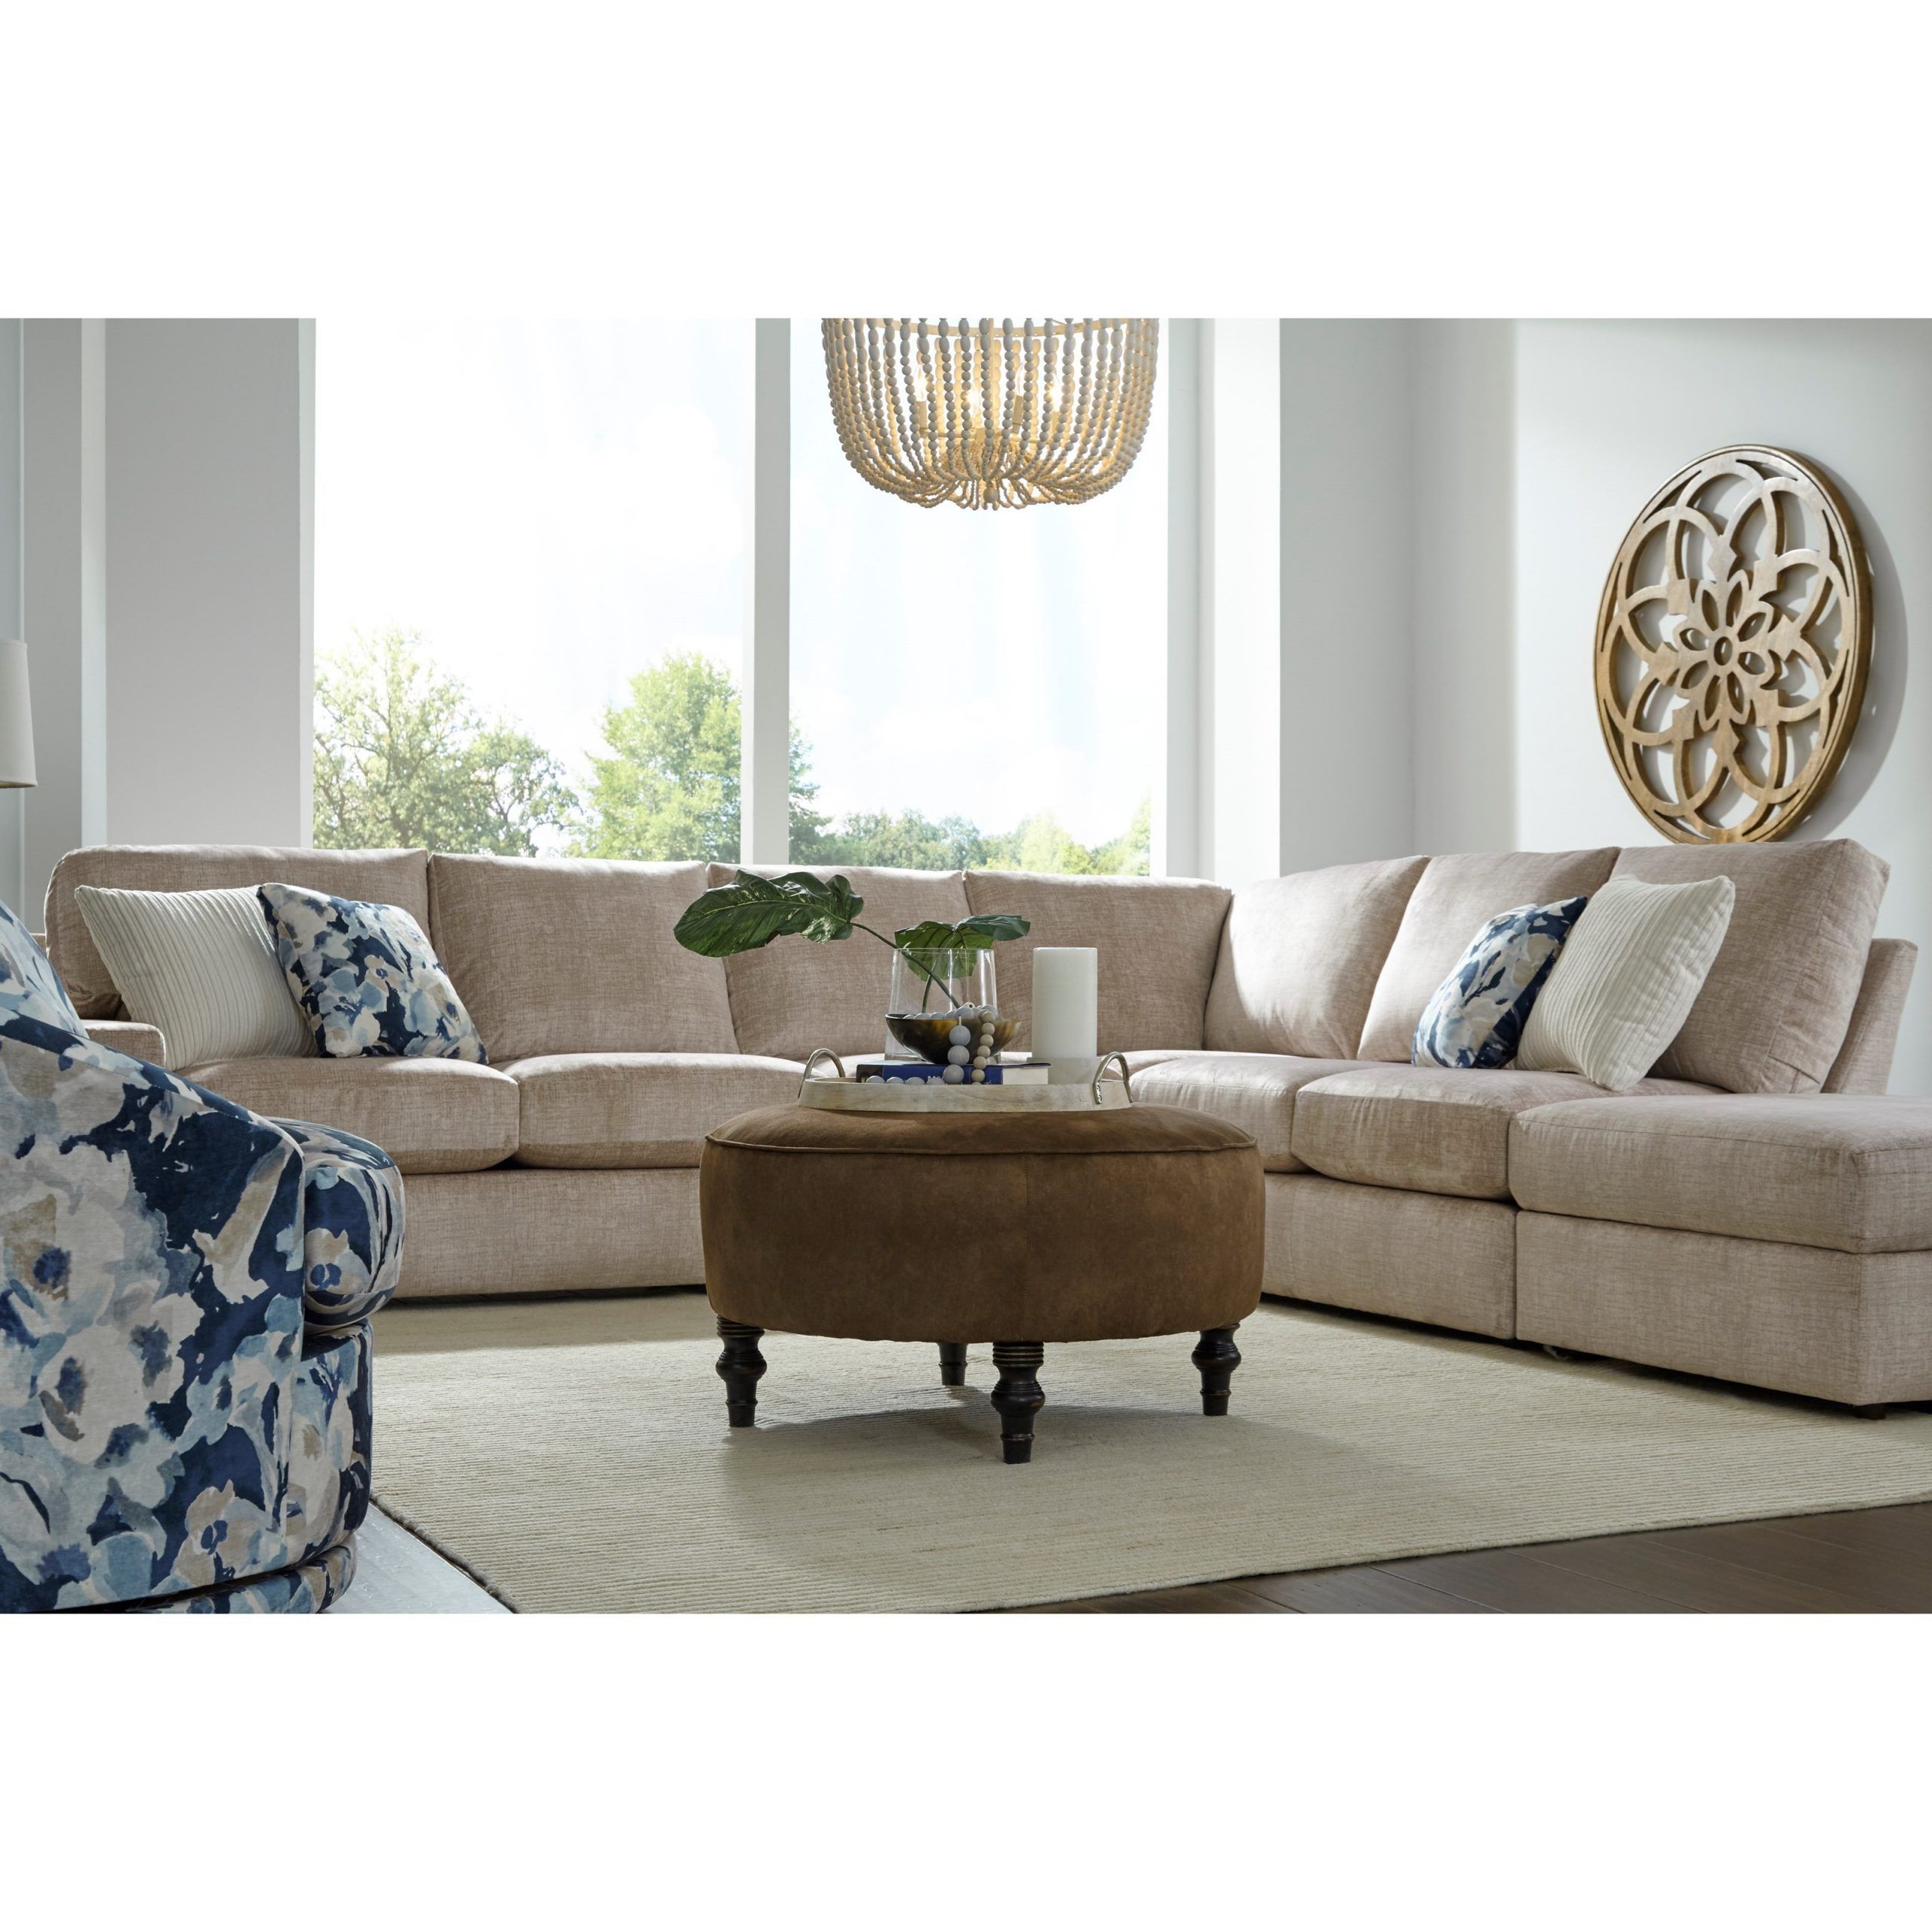 Best Home Furnishings Dovely Casual Five Seat Sectional Throughout Palisades Reversible Small Space Sectional Sofas With Storage (View 4 of 15)